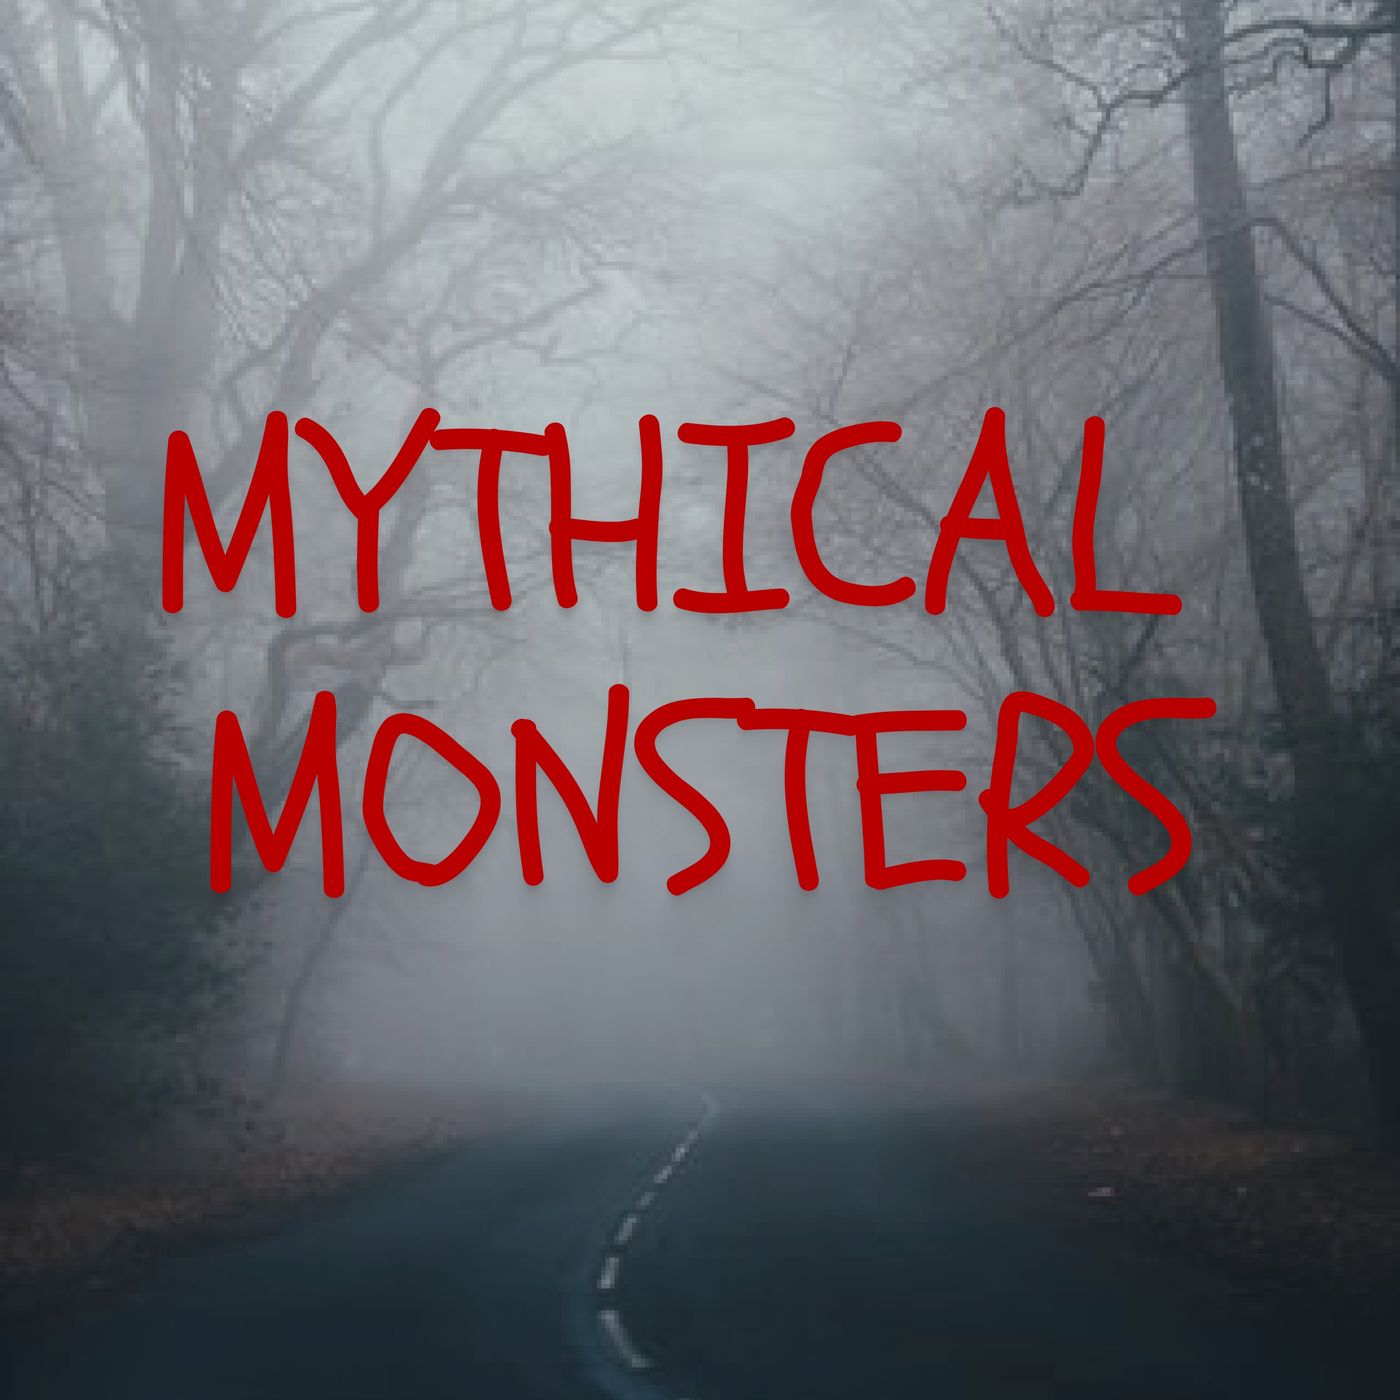 Mythical Monsters Trailer